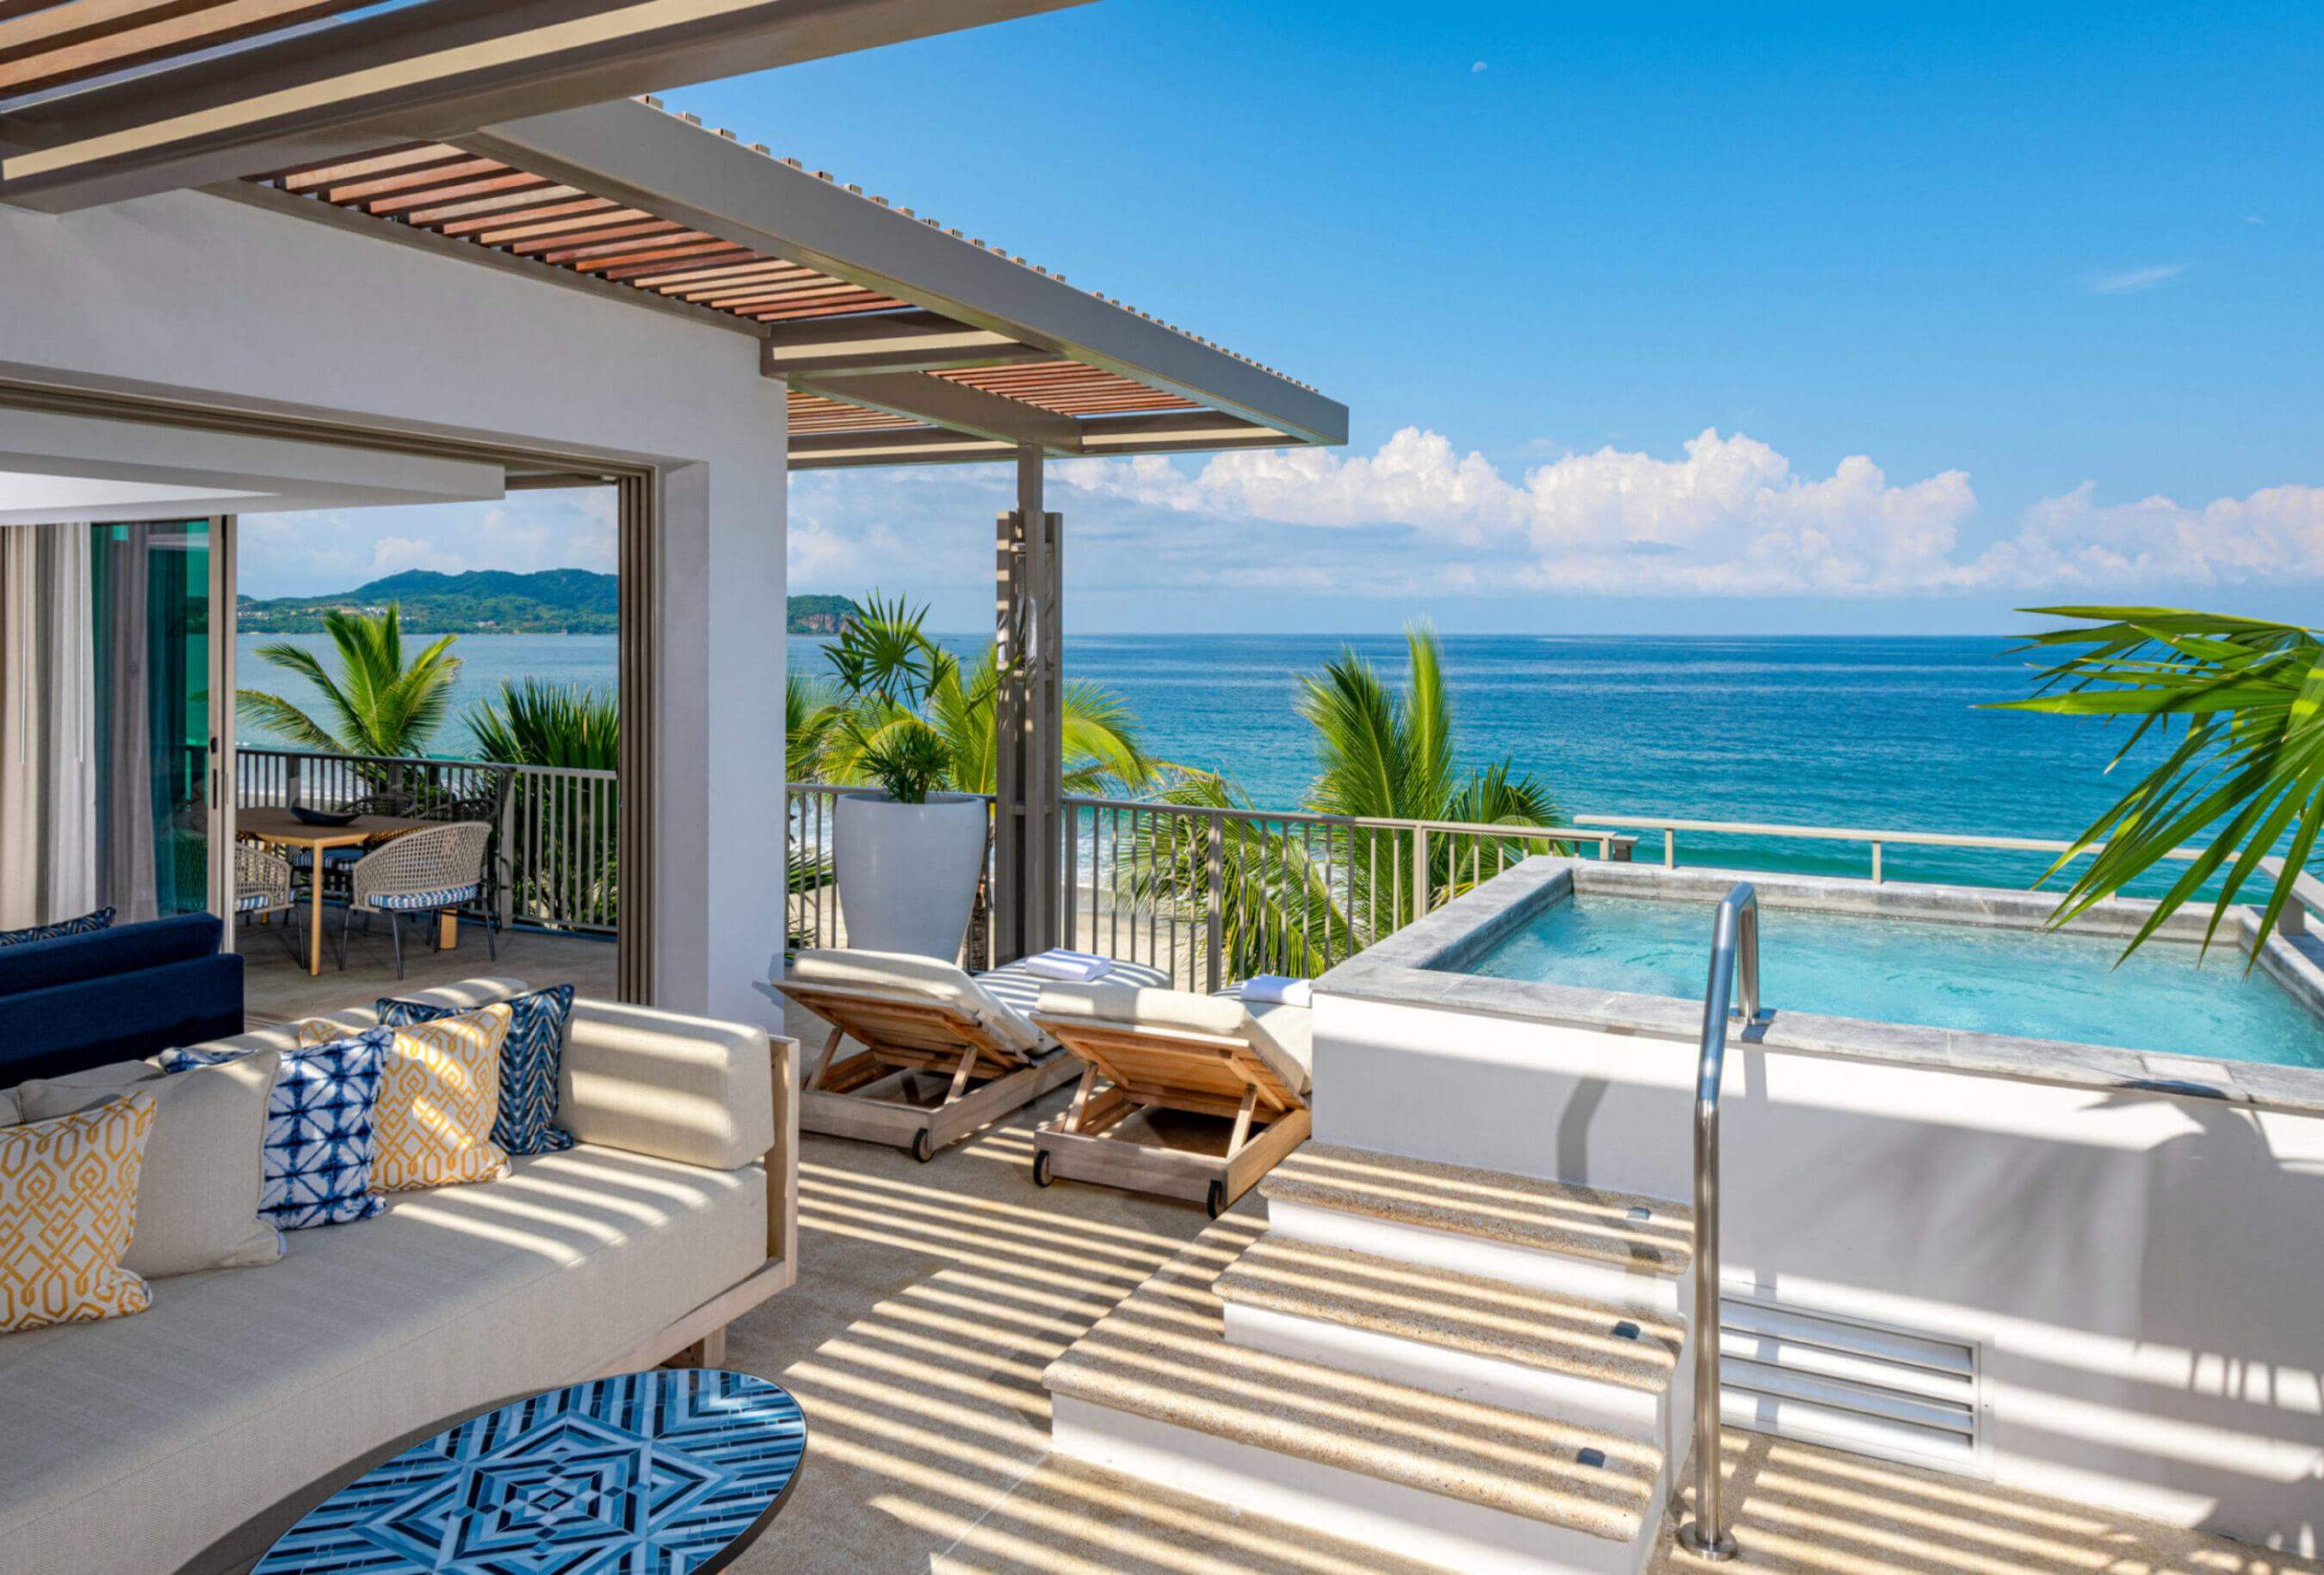 A balcony with small swimming pool on right side and with a beautiful view of ocean